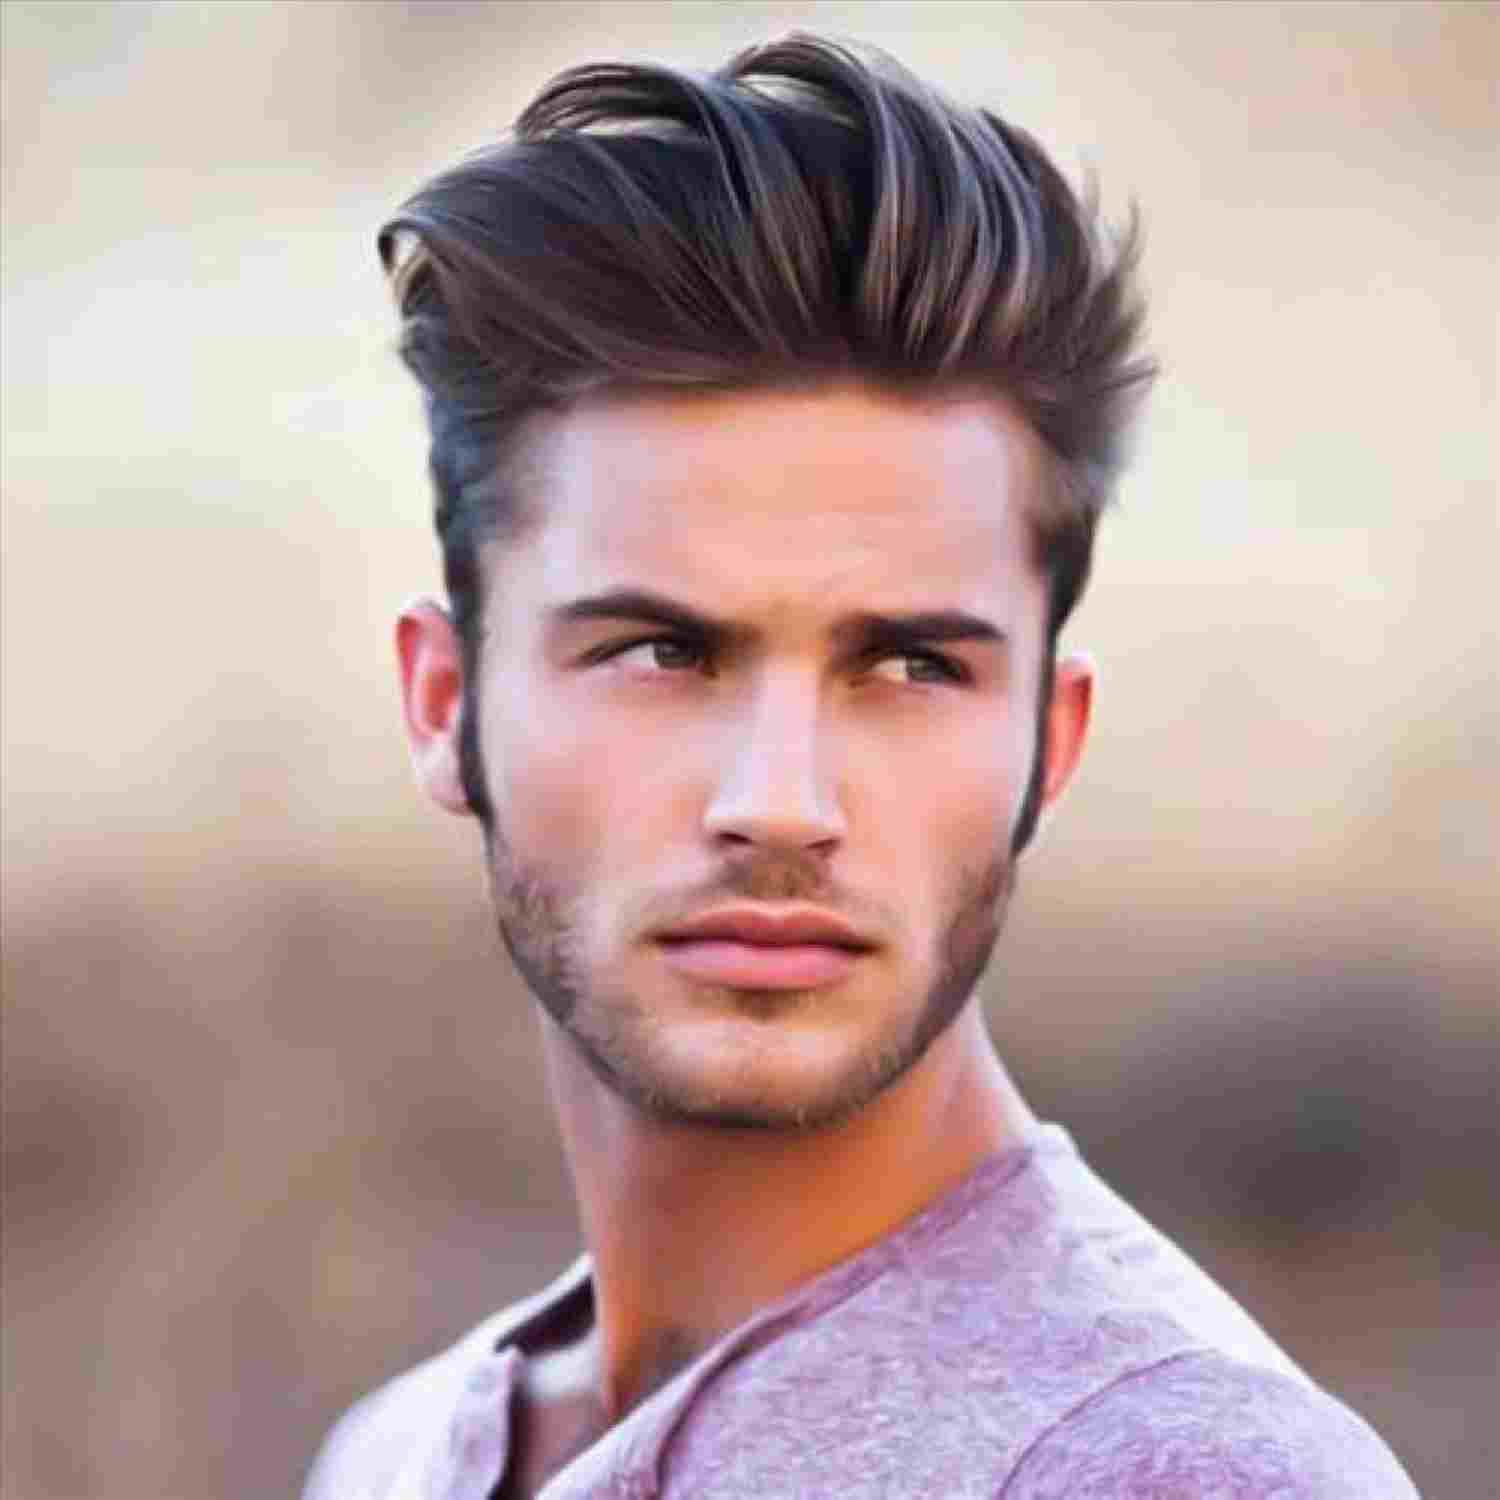 Hair Style Wallpaper Boy, image collections of wallpaper